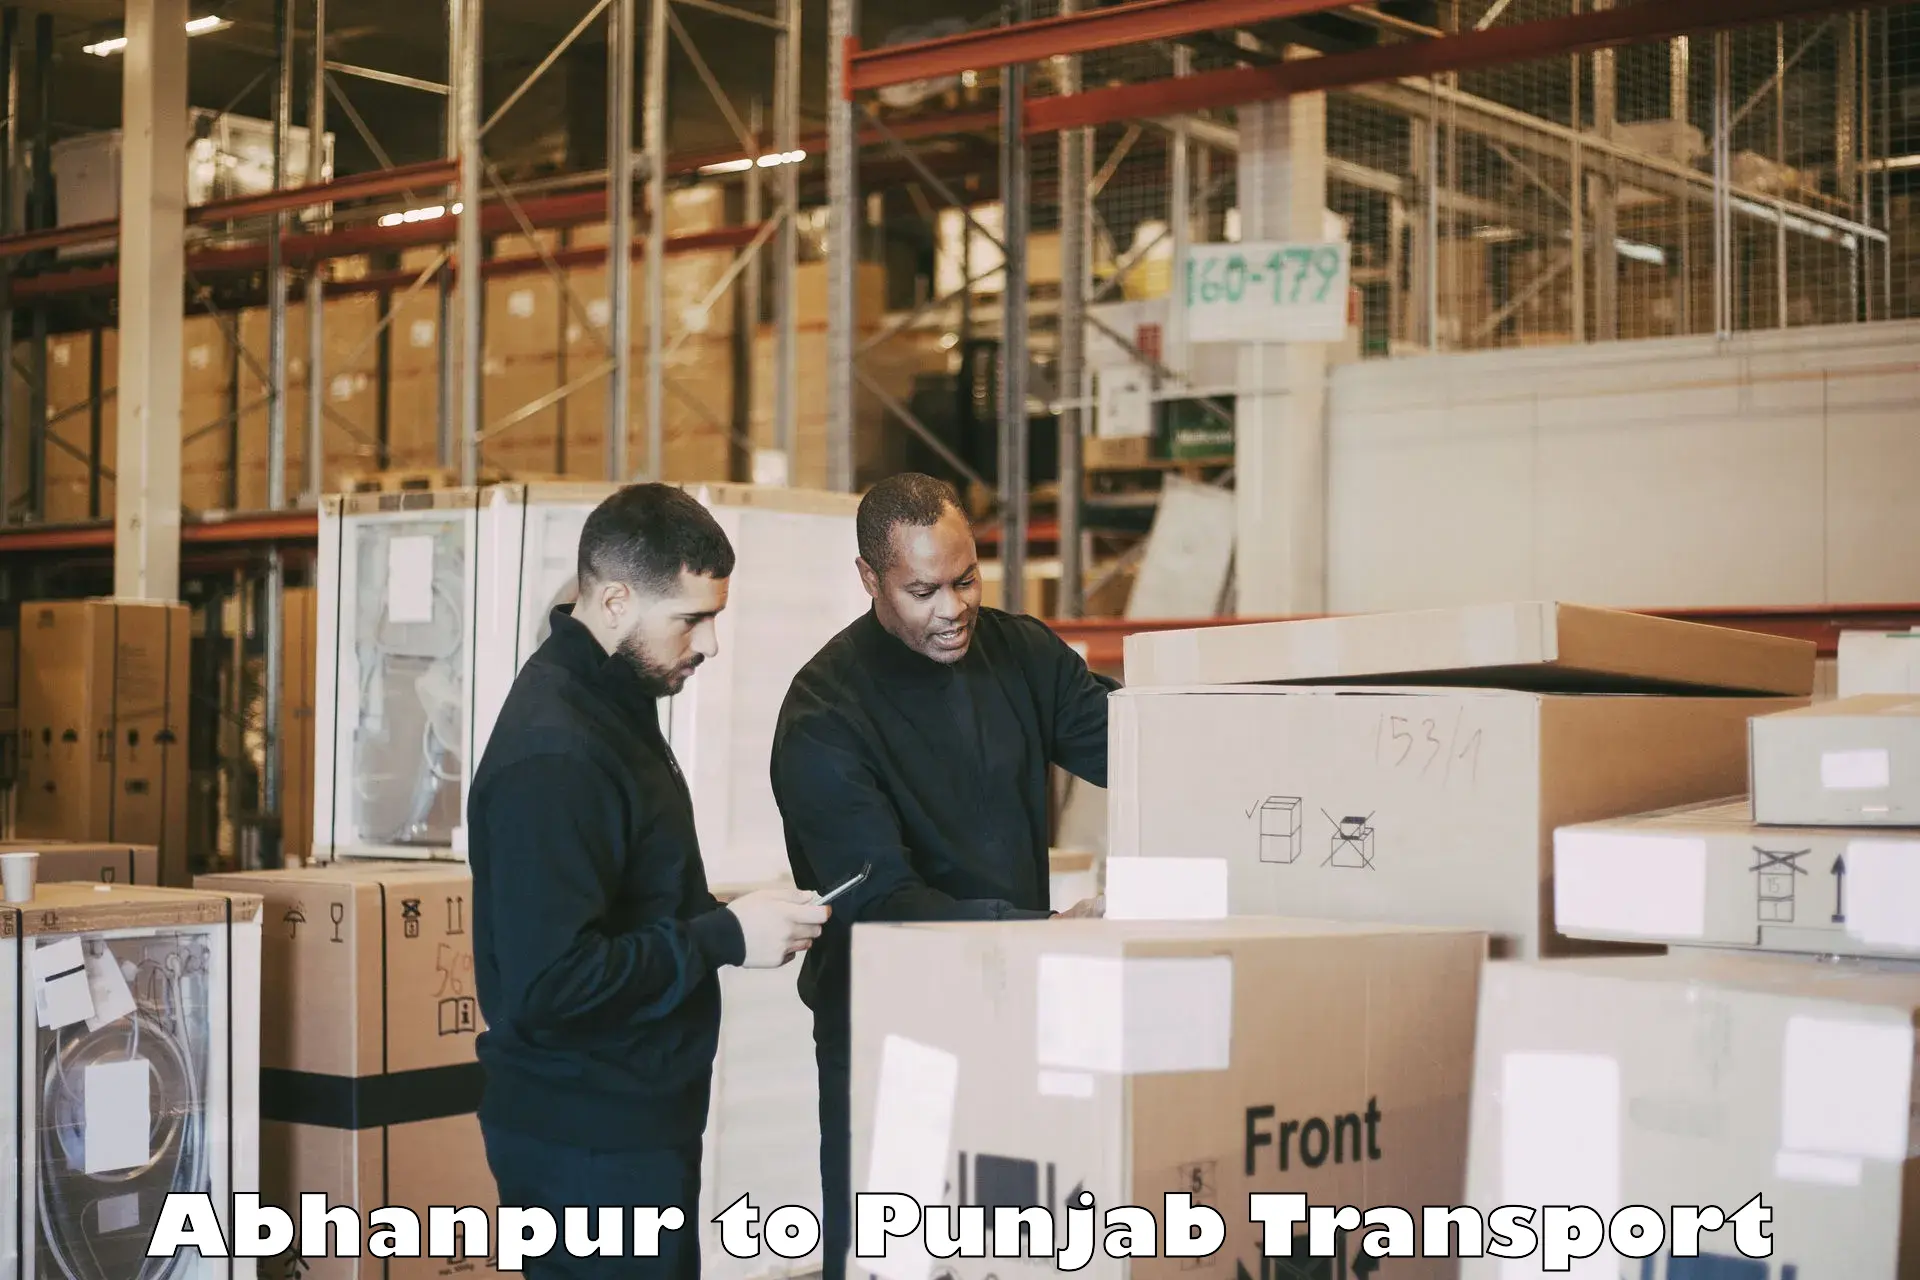 Cycle transportation service Abhanpur to Punjab